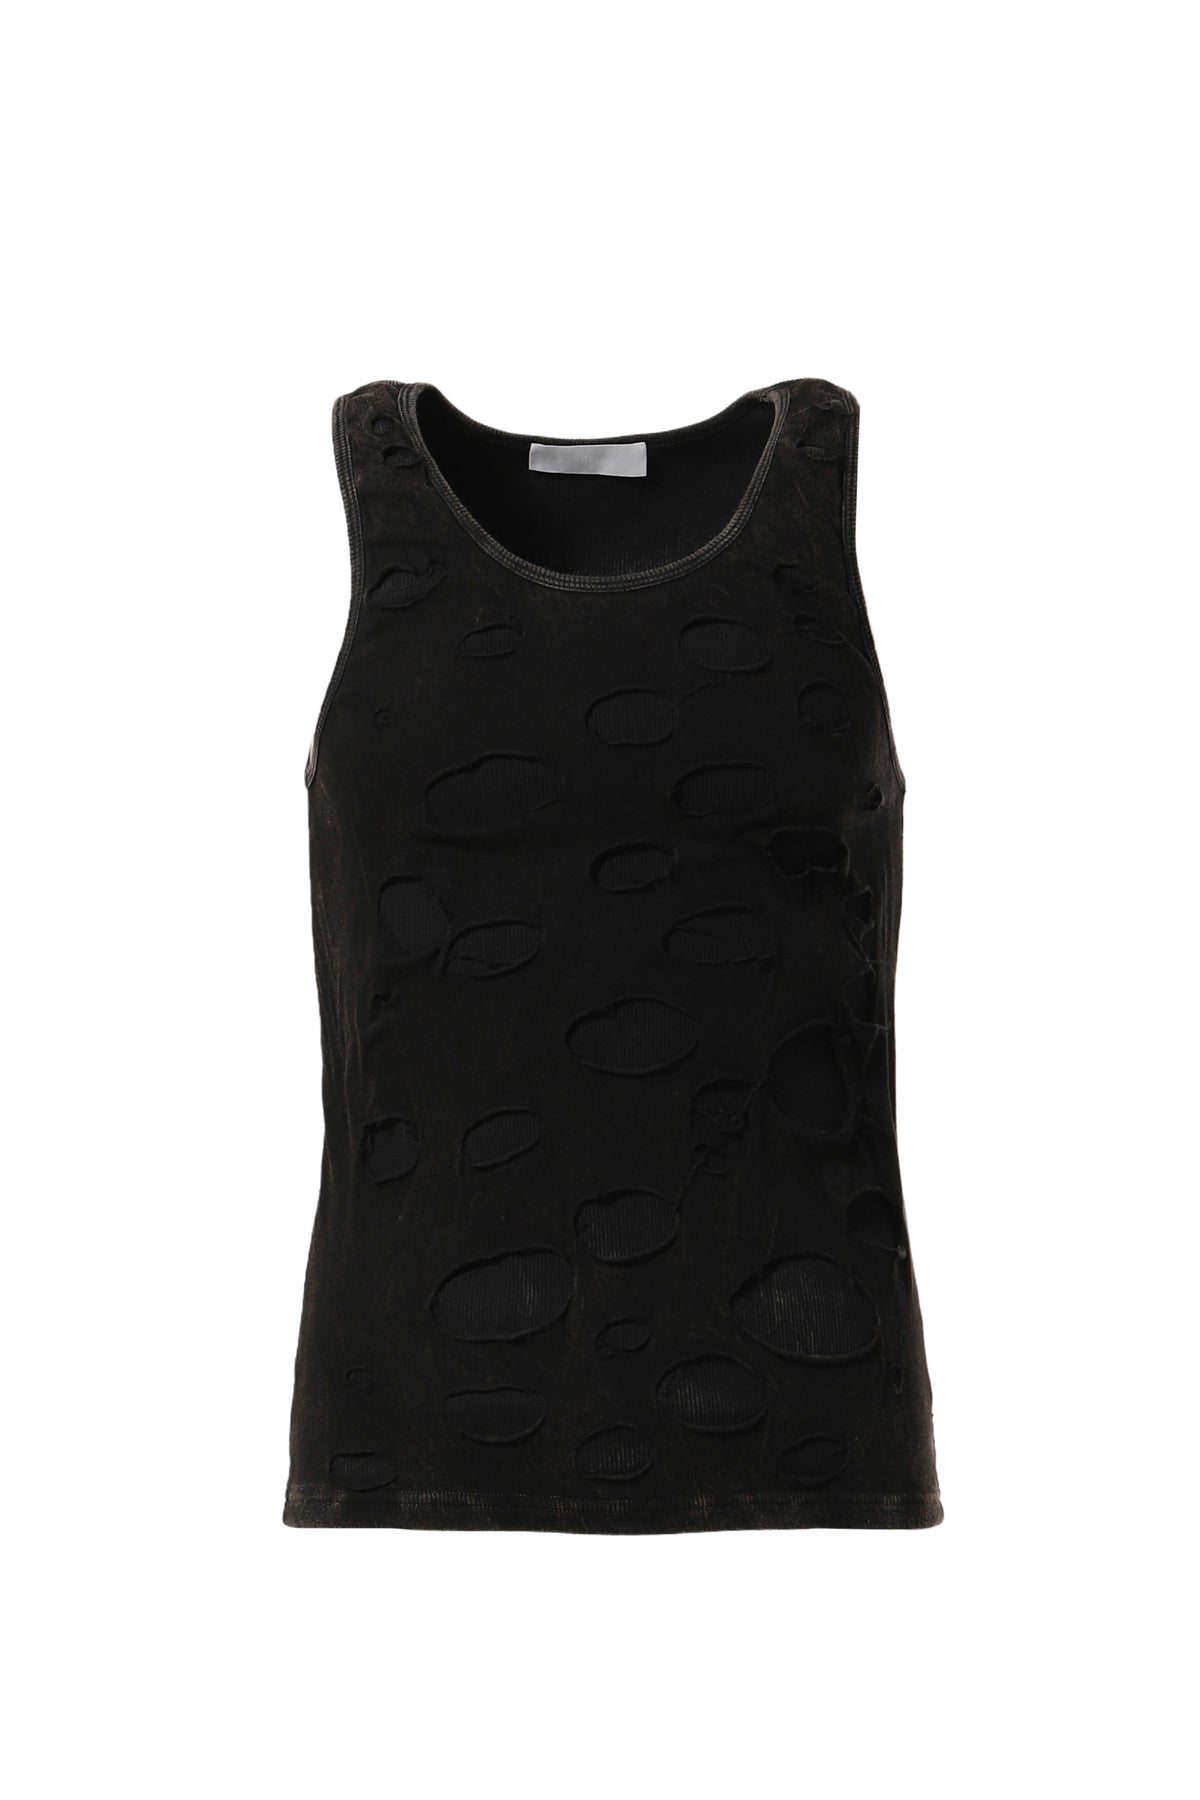 DOUBLE LAYER TANK TOP / BLK